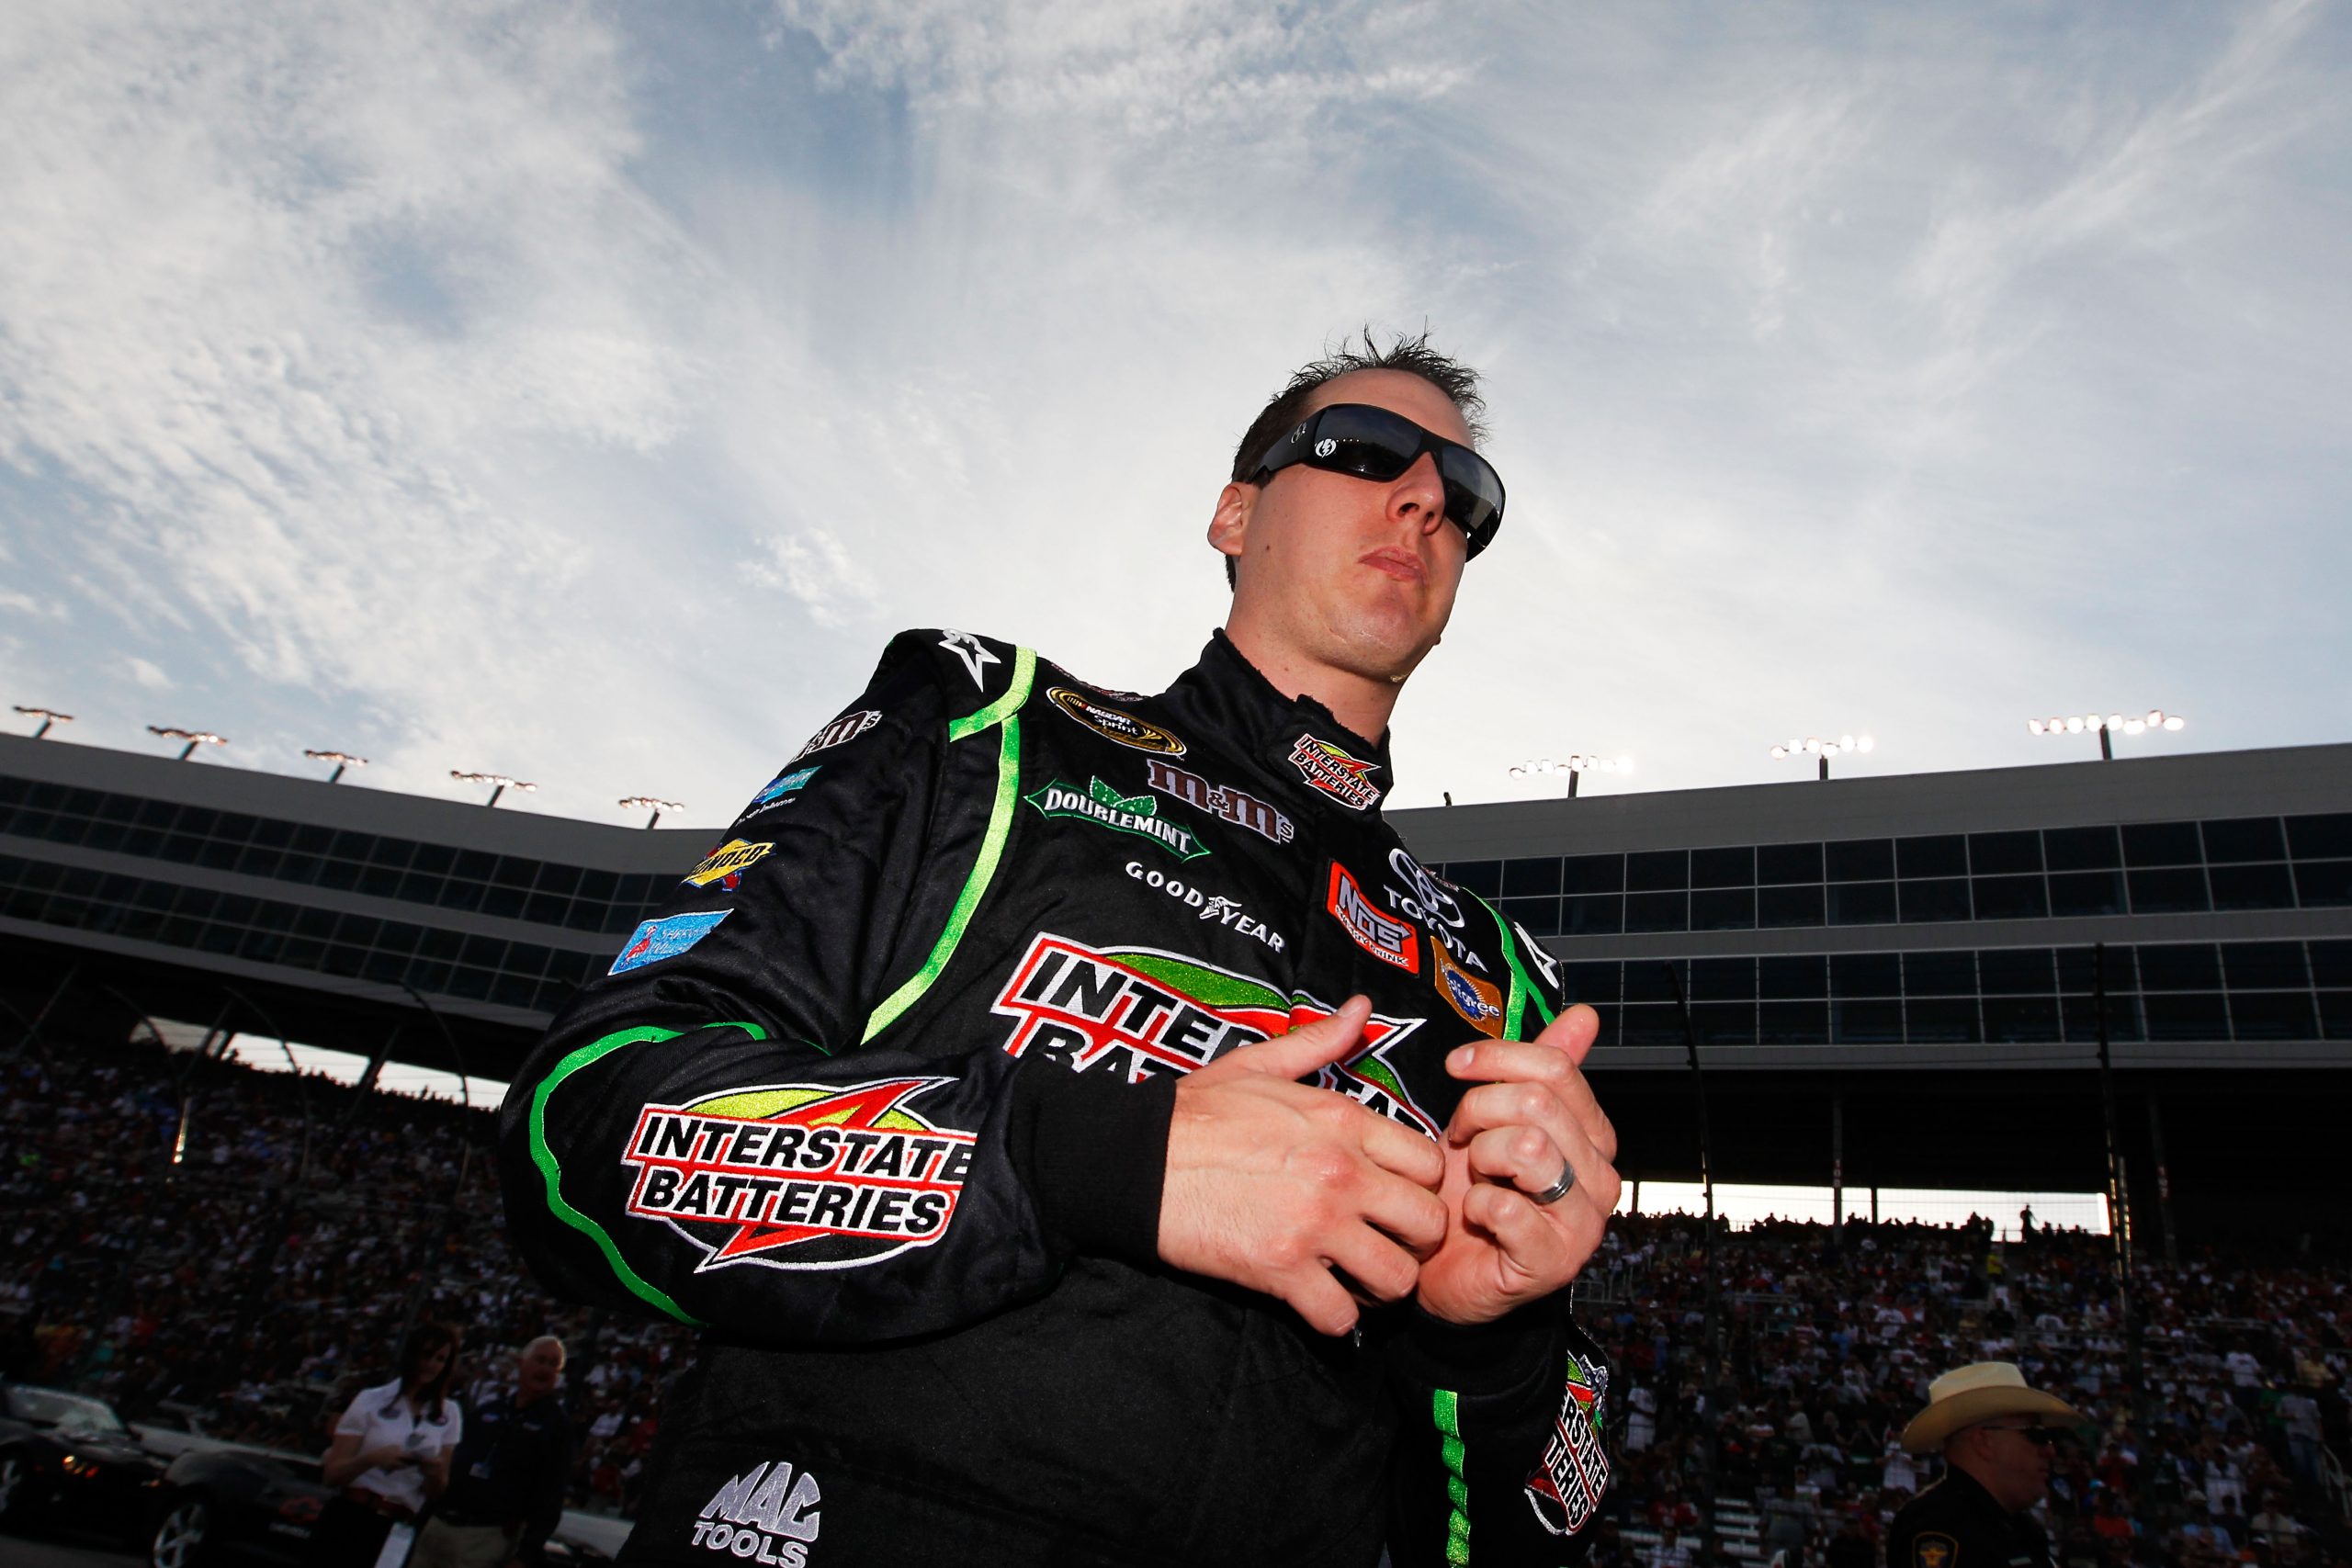 Kyle Busch Was Once Parked by NASCAR at Texas Motor Speedway and Fined $50,000 for Purposely Pushing a Fellow Driver Into the Wall